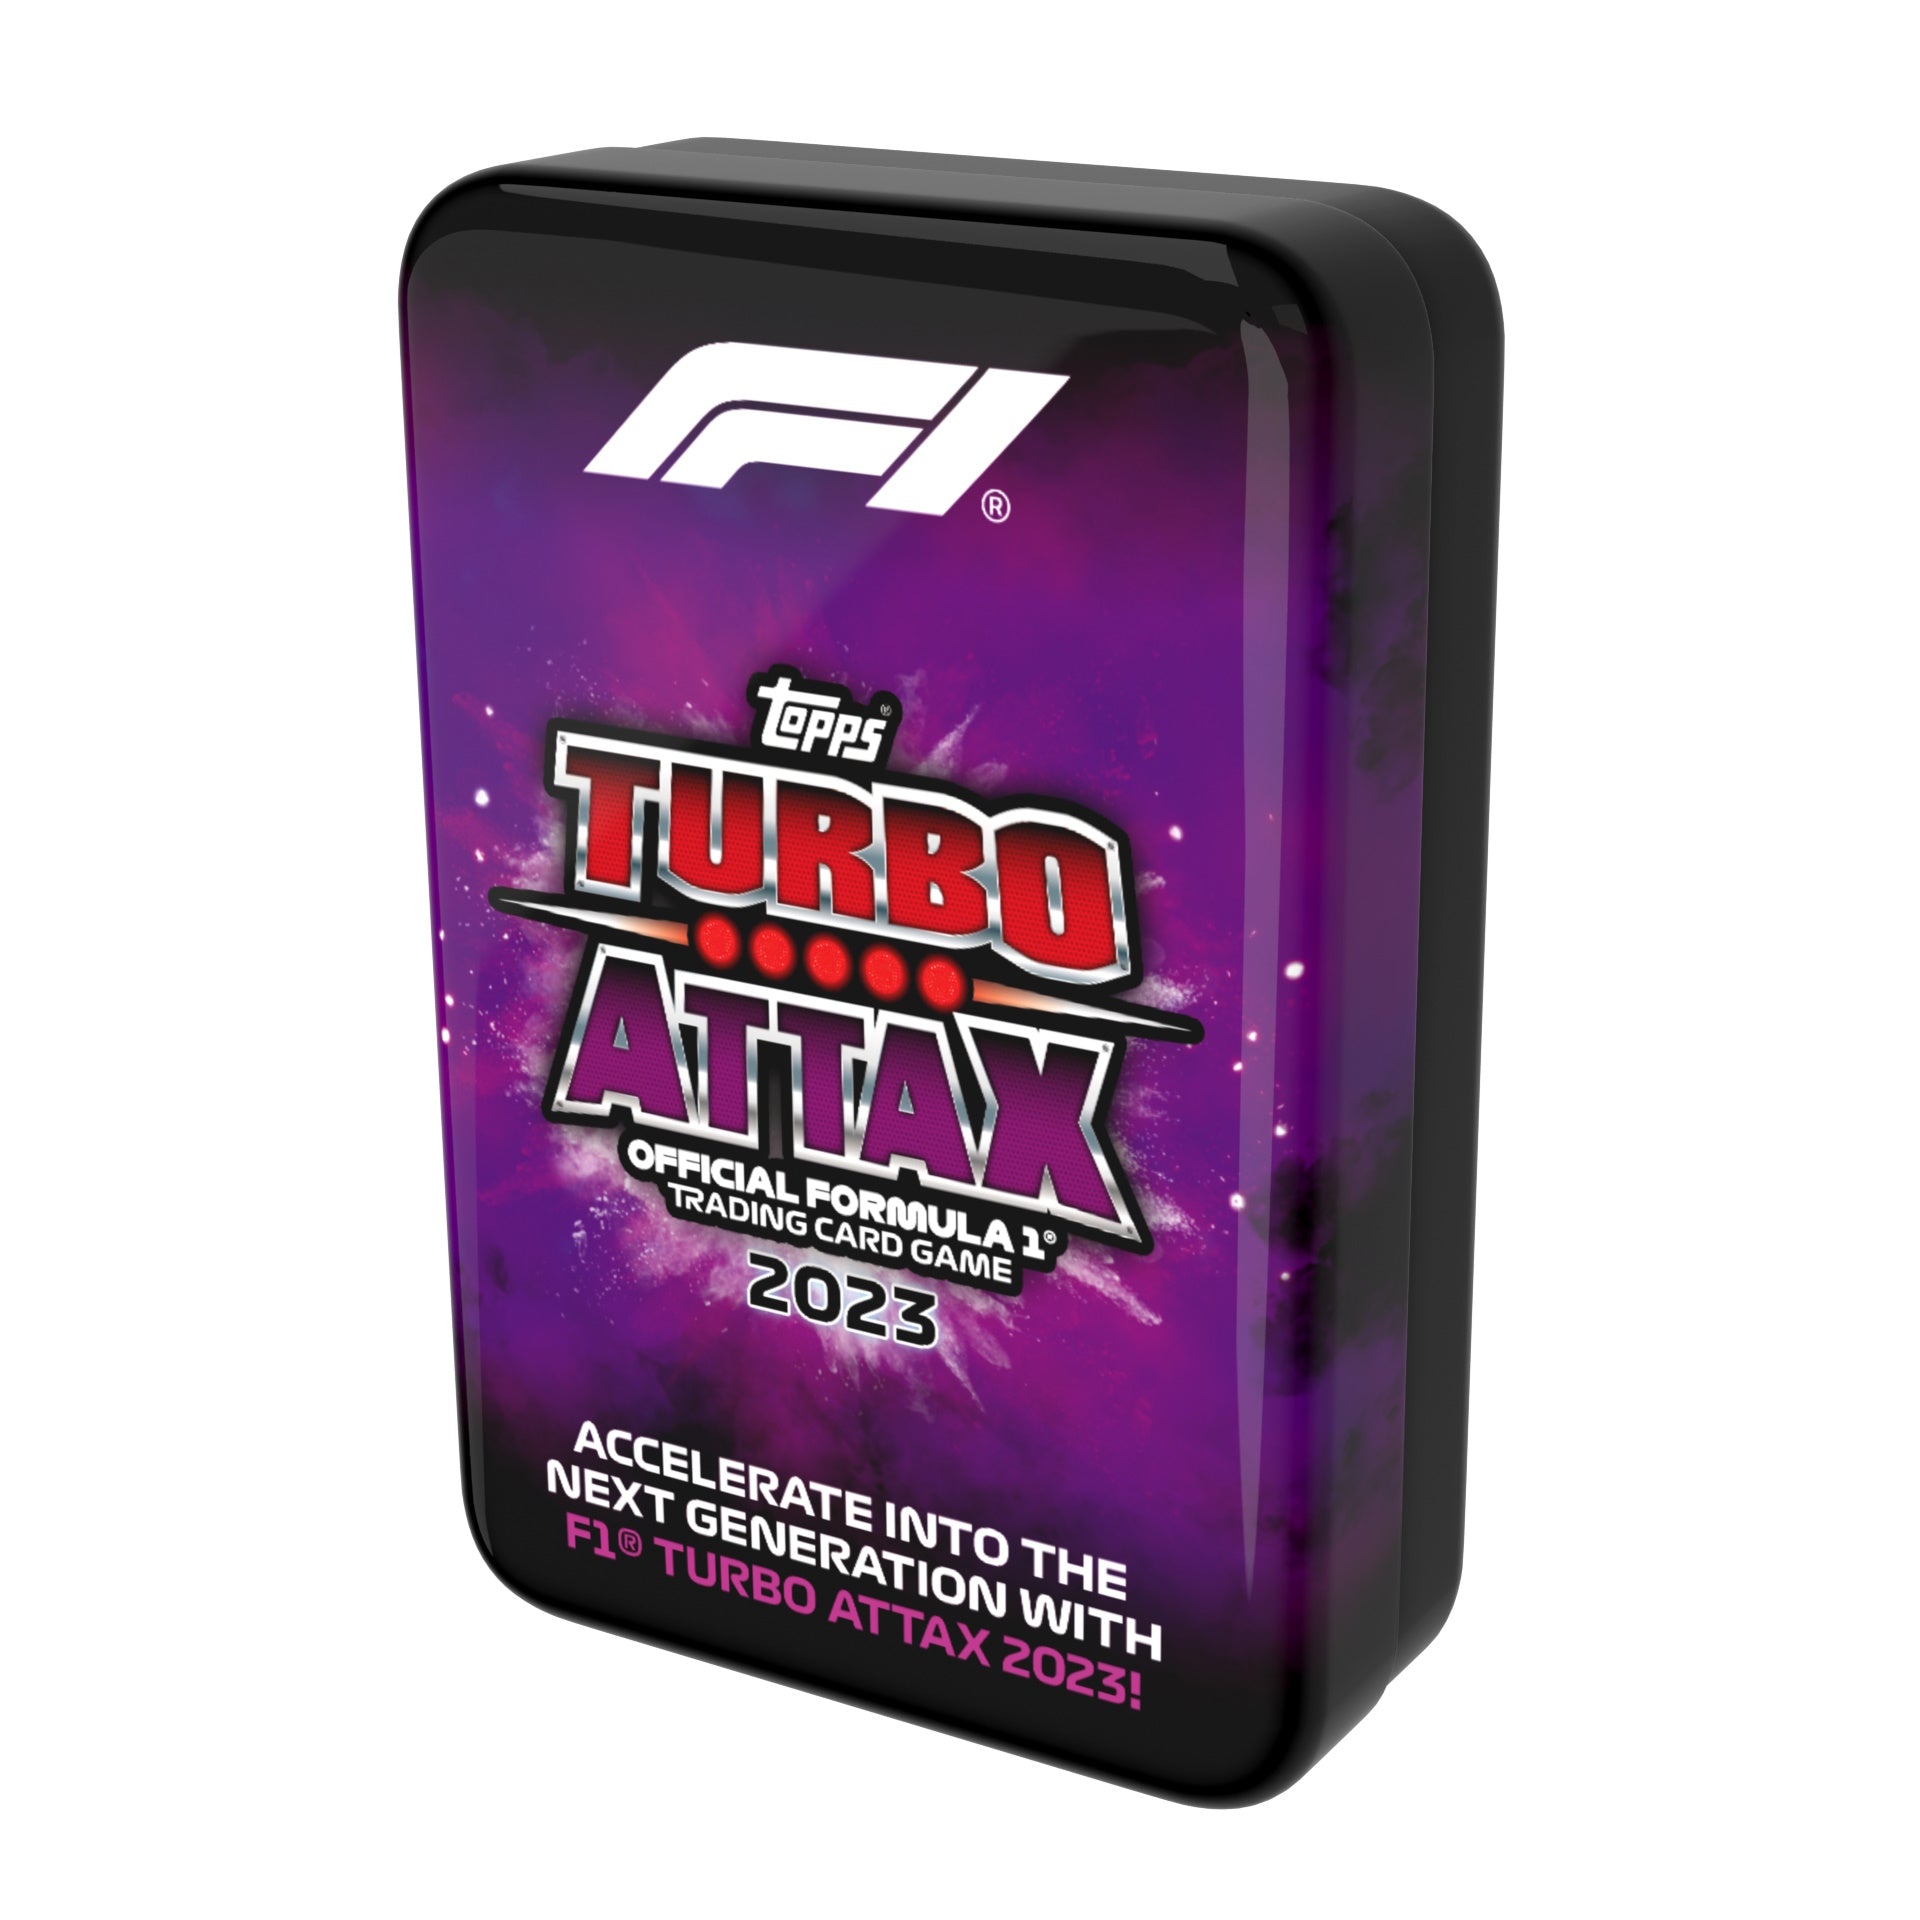 2023 TOPPS TURBO ATTAX FORMULA 1 CARDS - MEGA TIN 3-PACK SET (EACH 66 CARDS + 6 LE & 4 EXCLUSIVE)